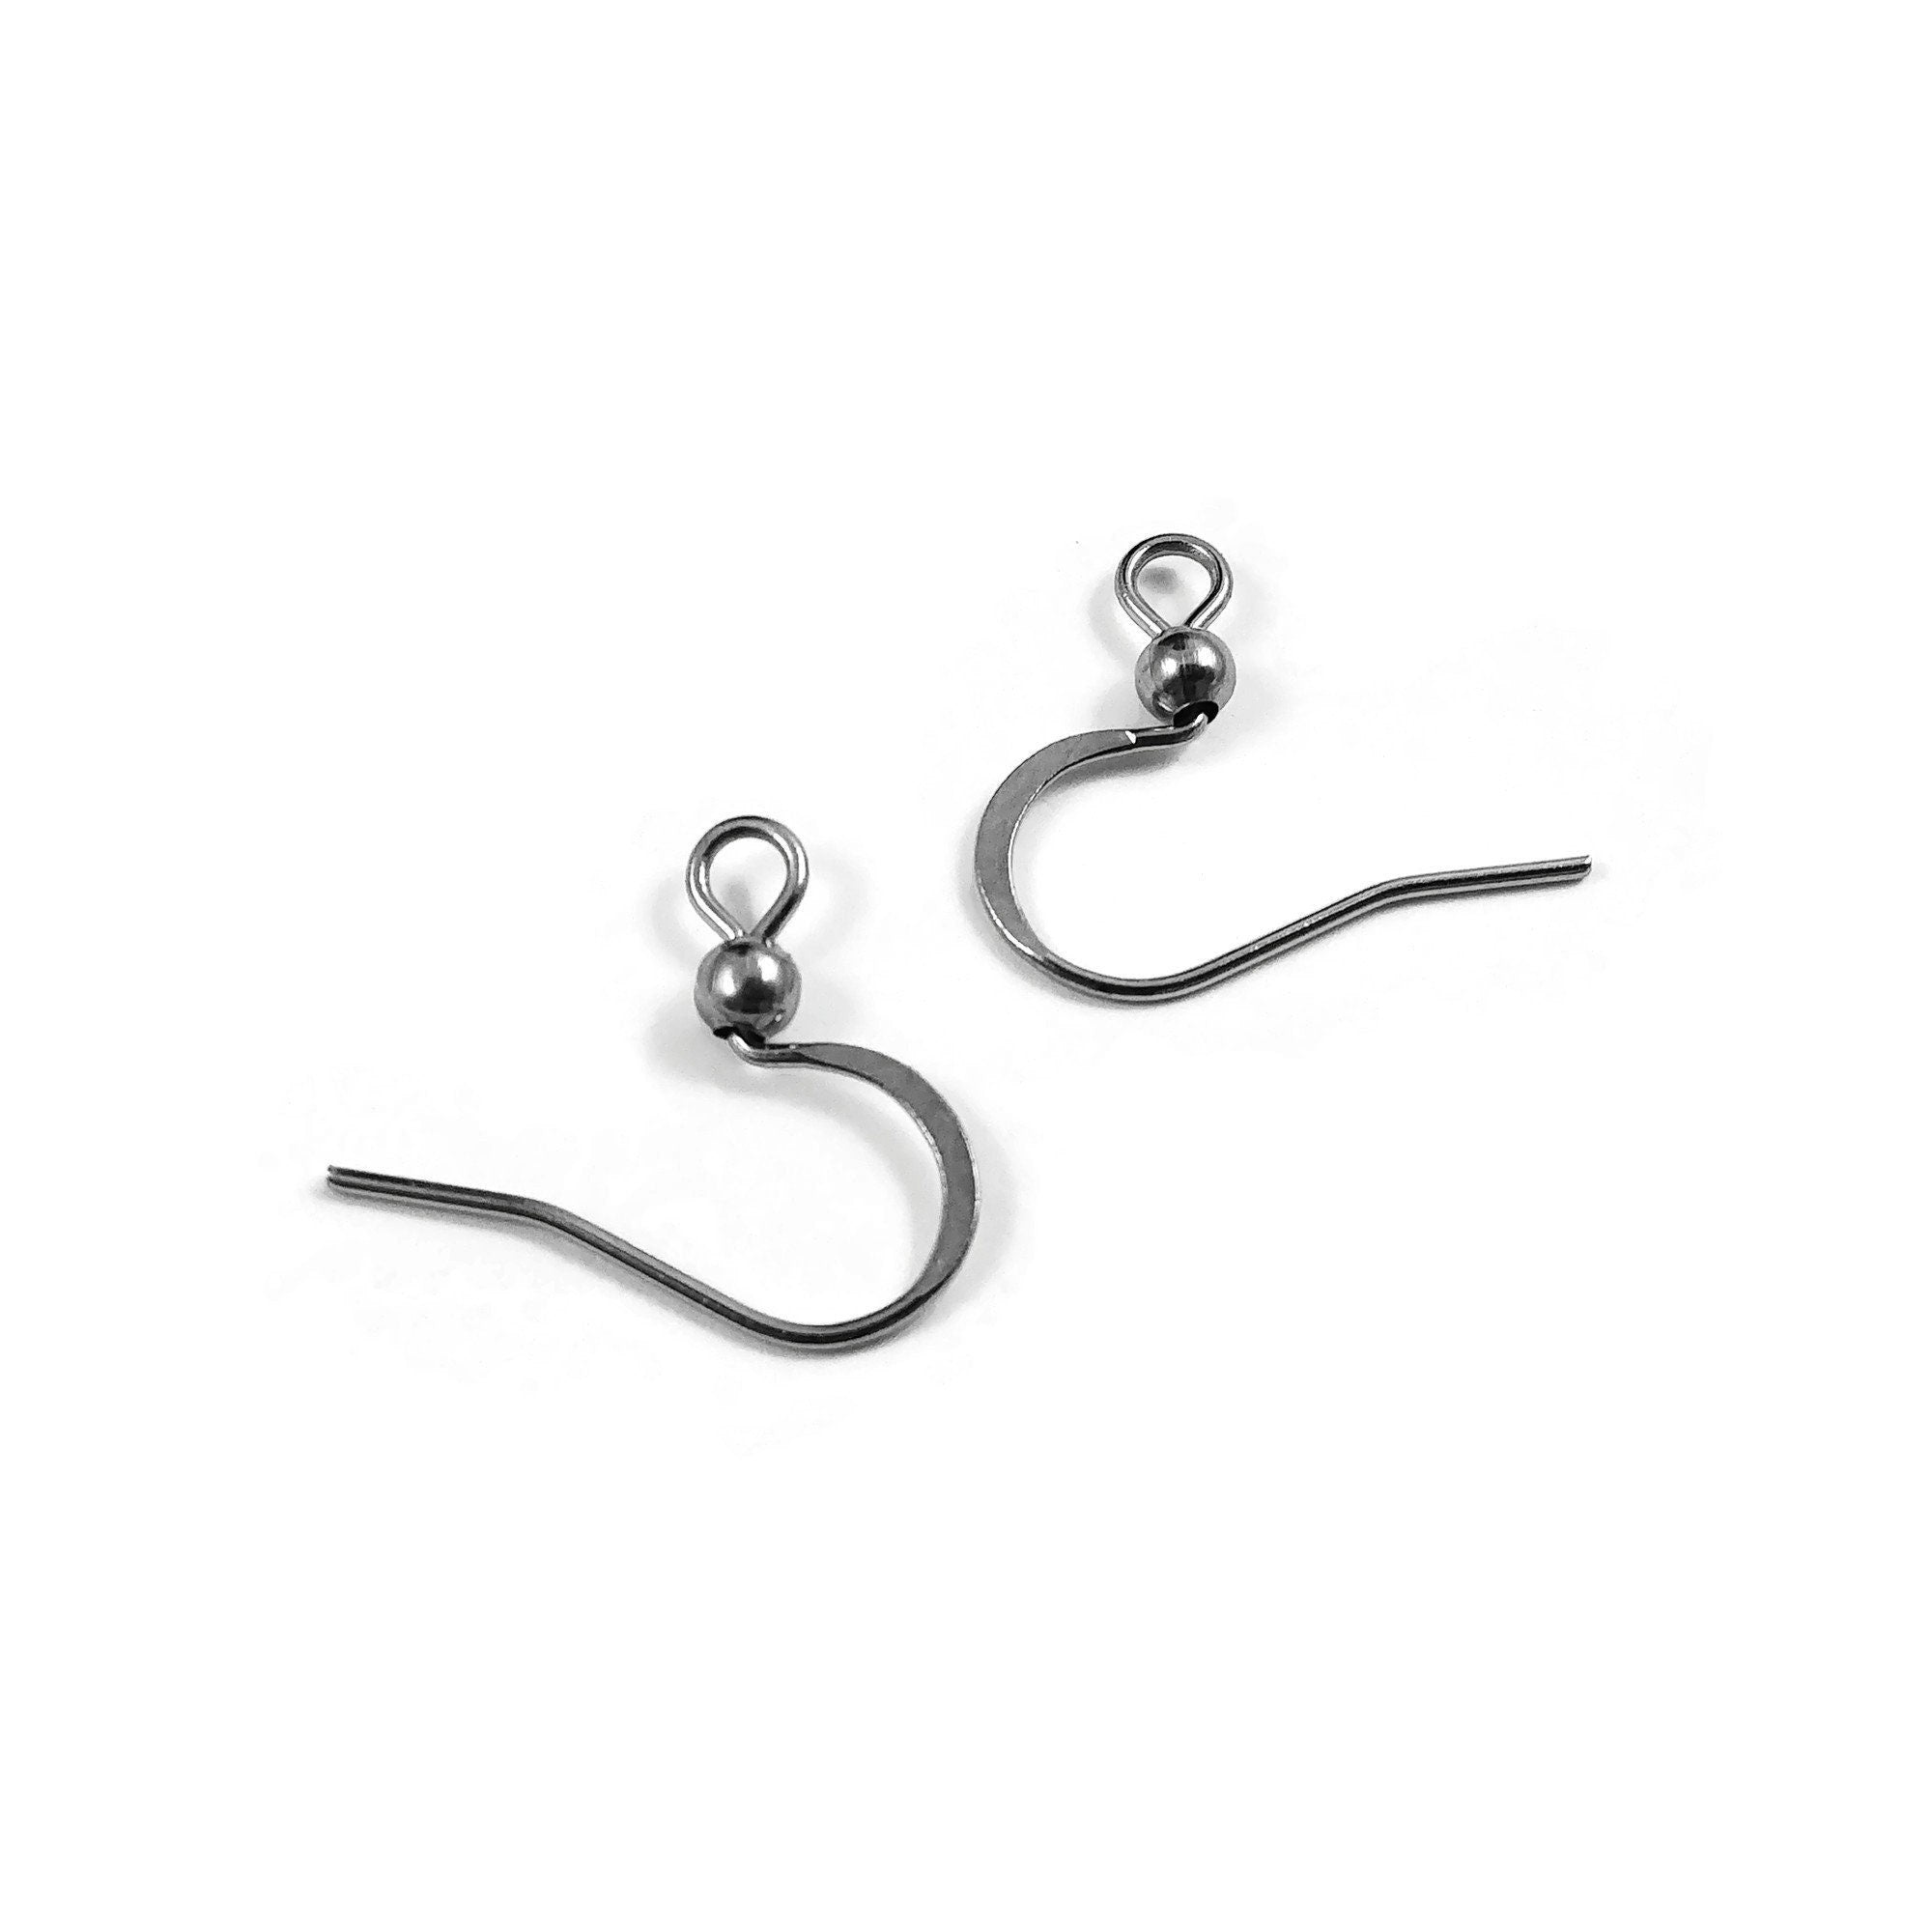 316 Surgical stainless steel earring backs, Hypoallergenic findings